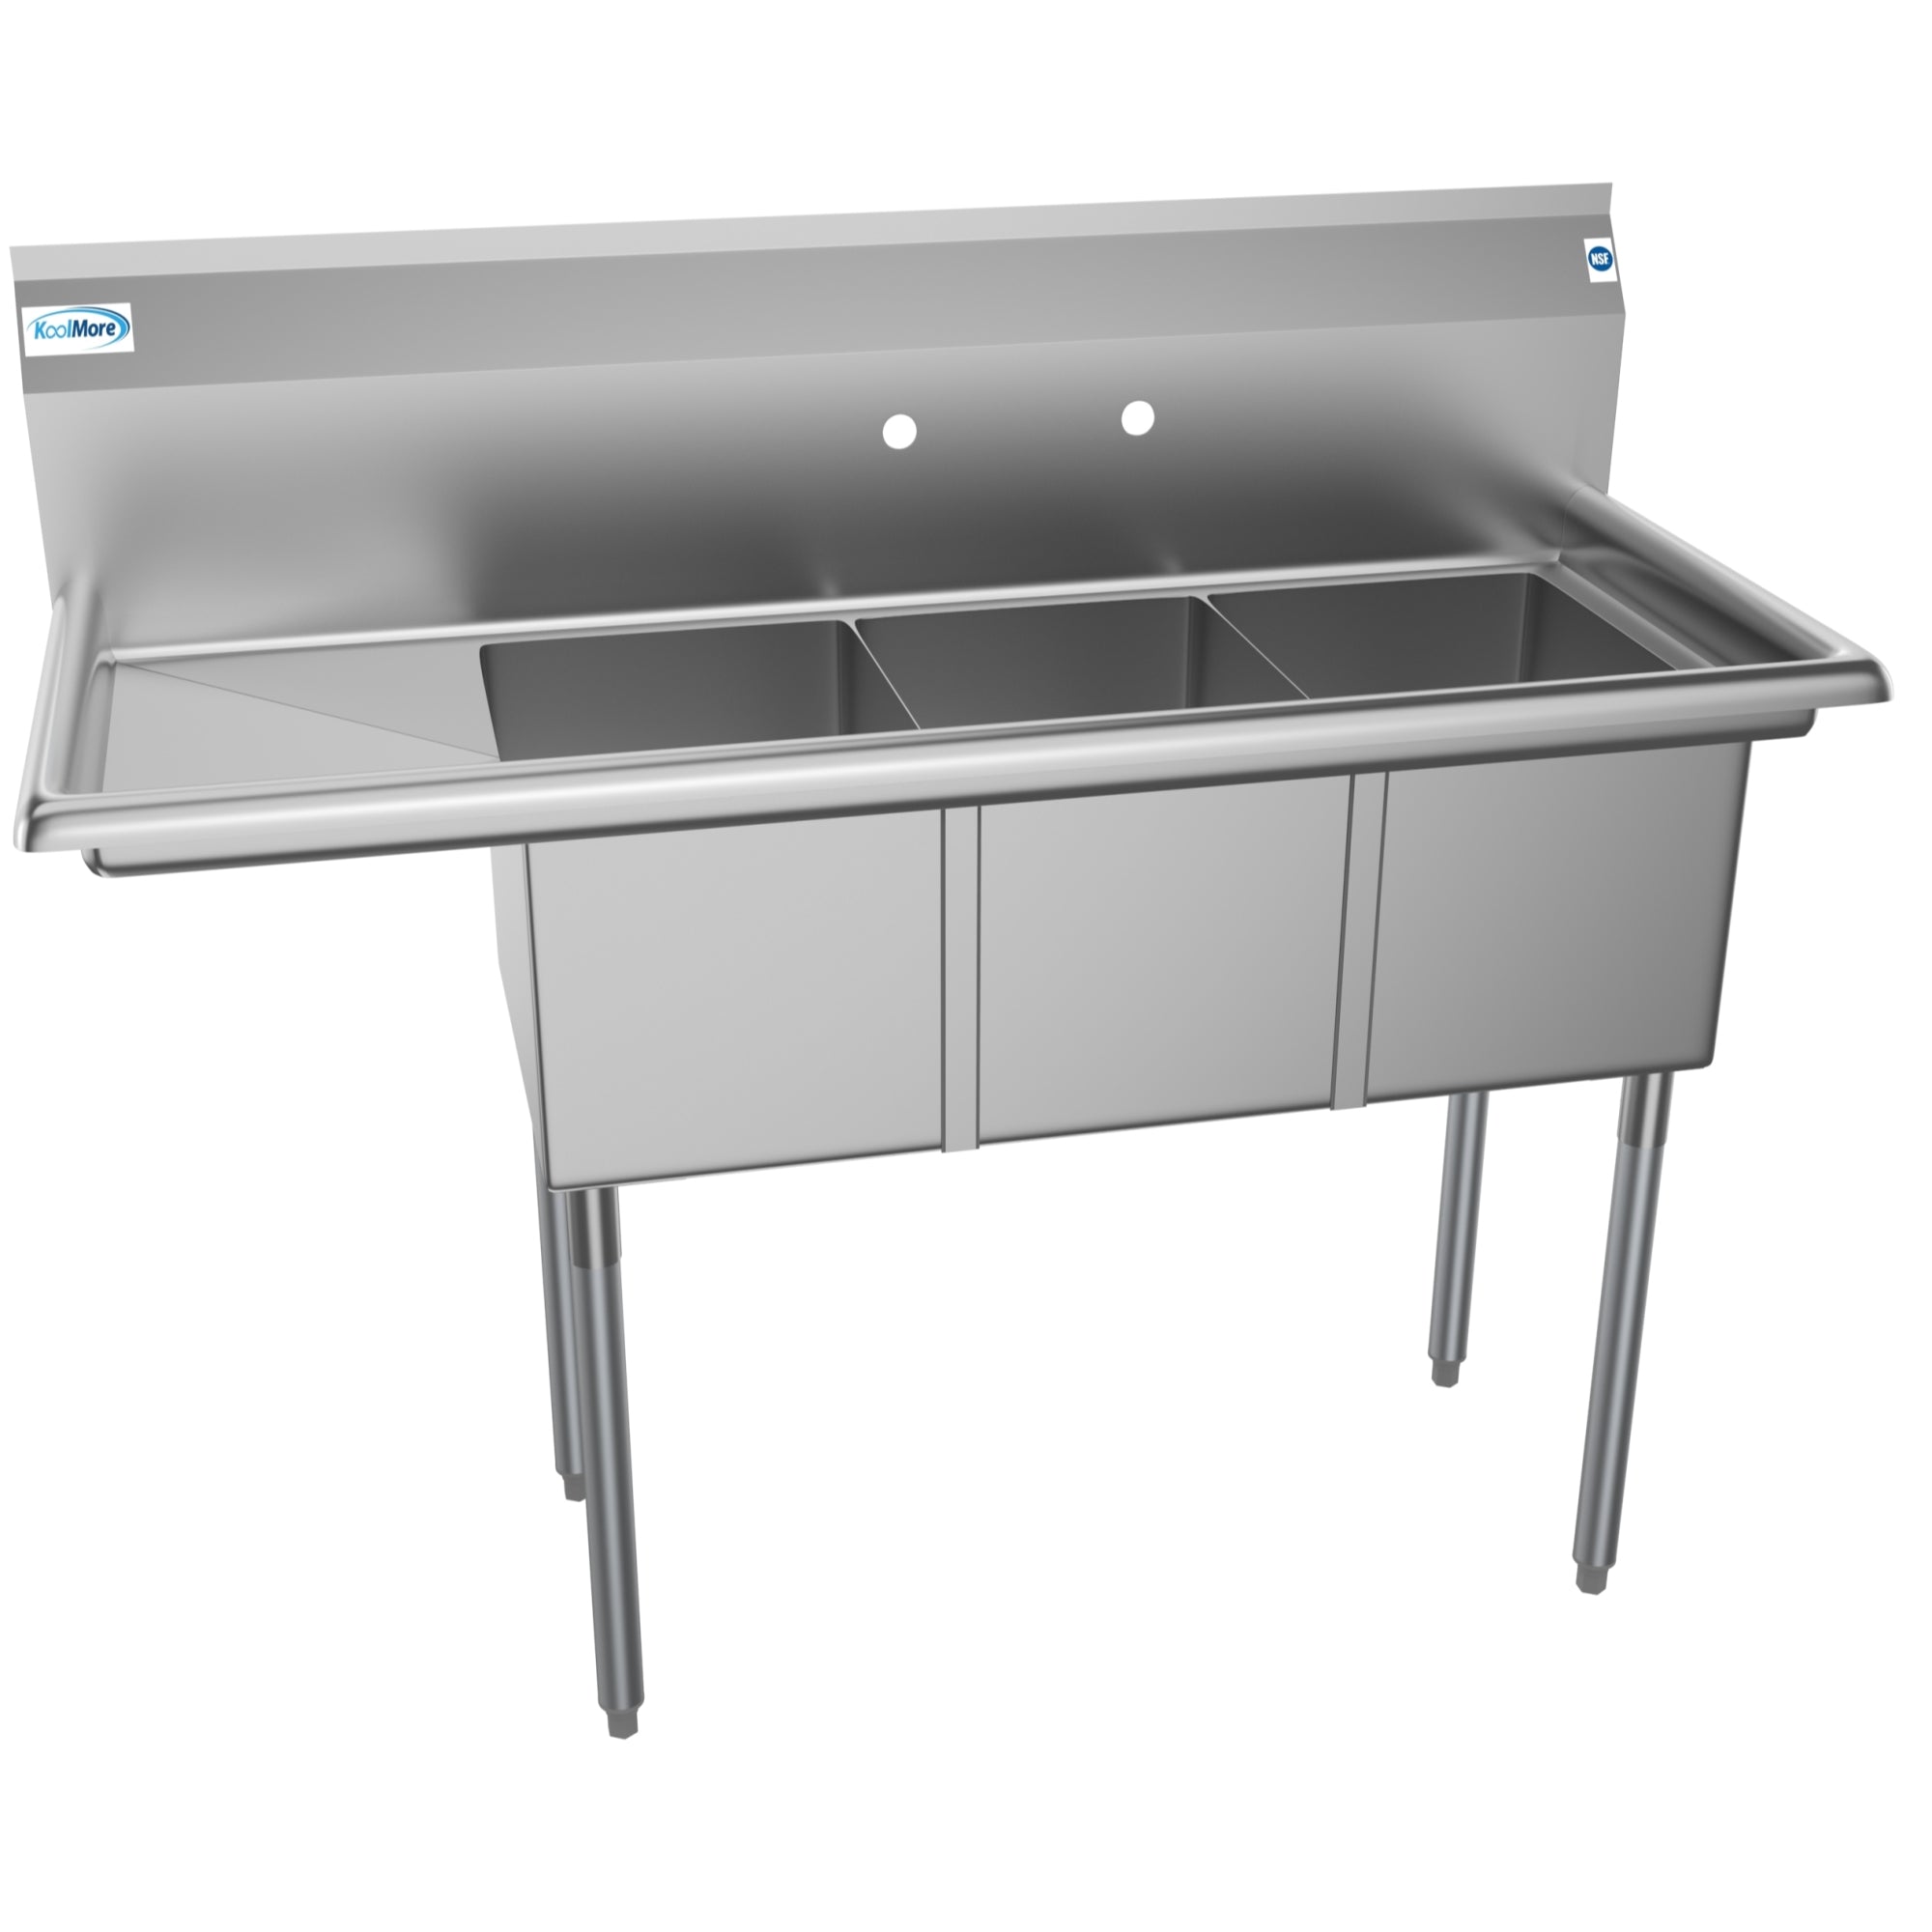 51 in. Three Compartment Stainless Steel Commercial Sink with Drainboard, Bowl Size 12